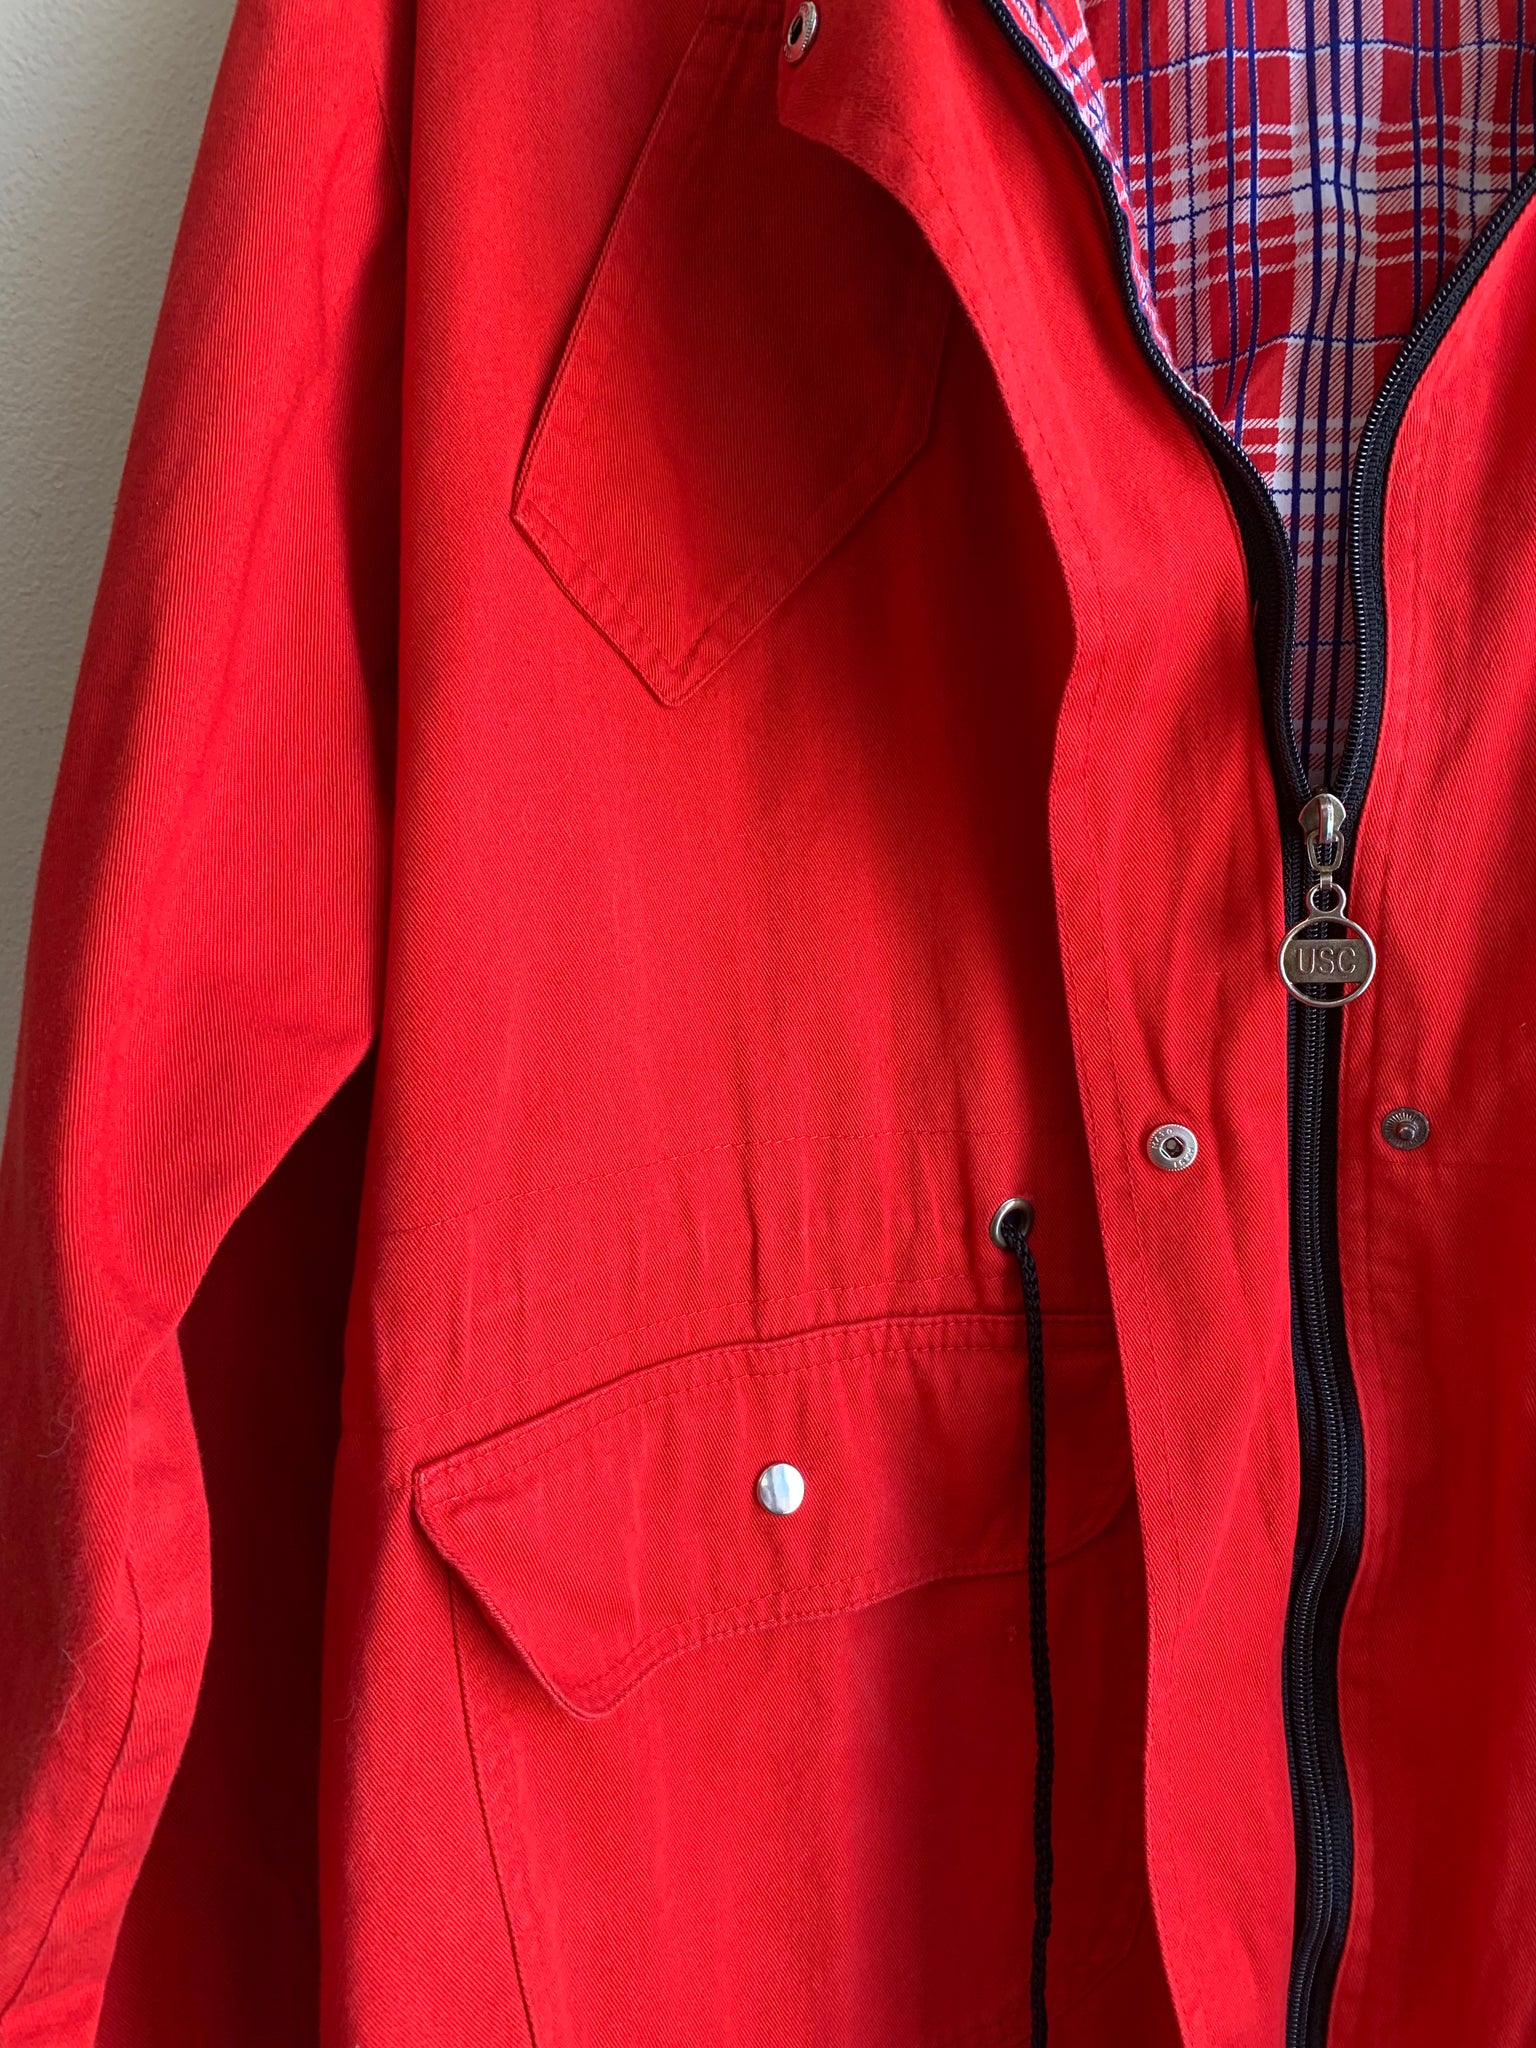 Red Cotton Jacket - L